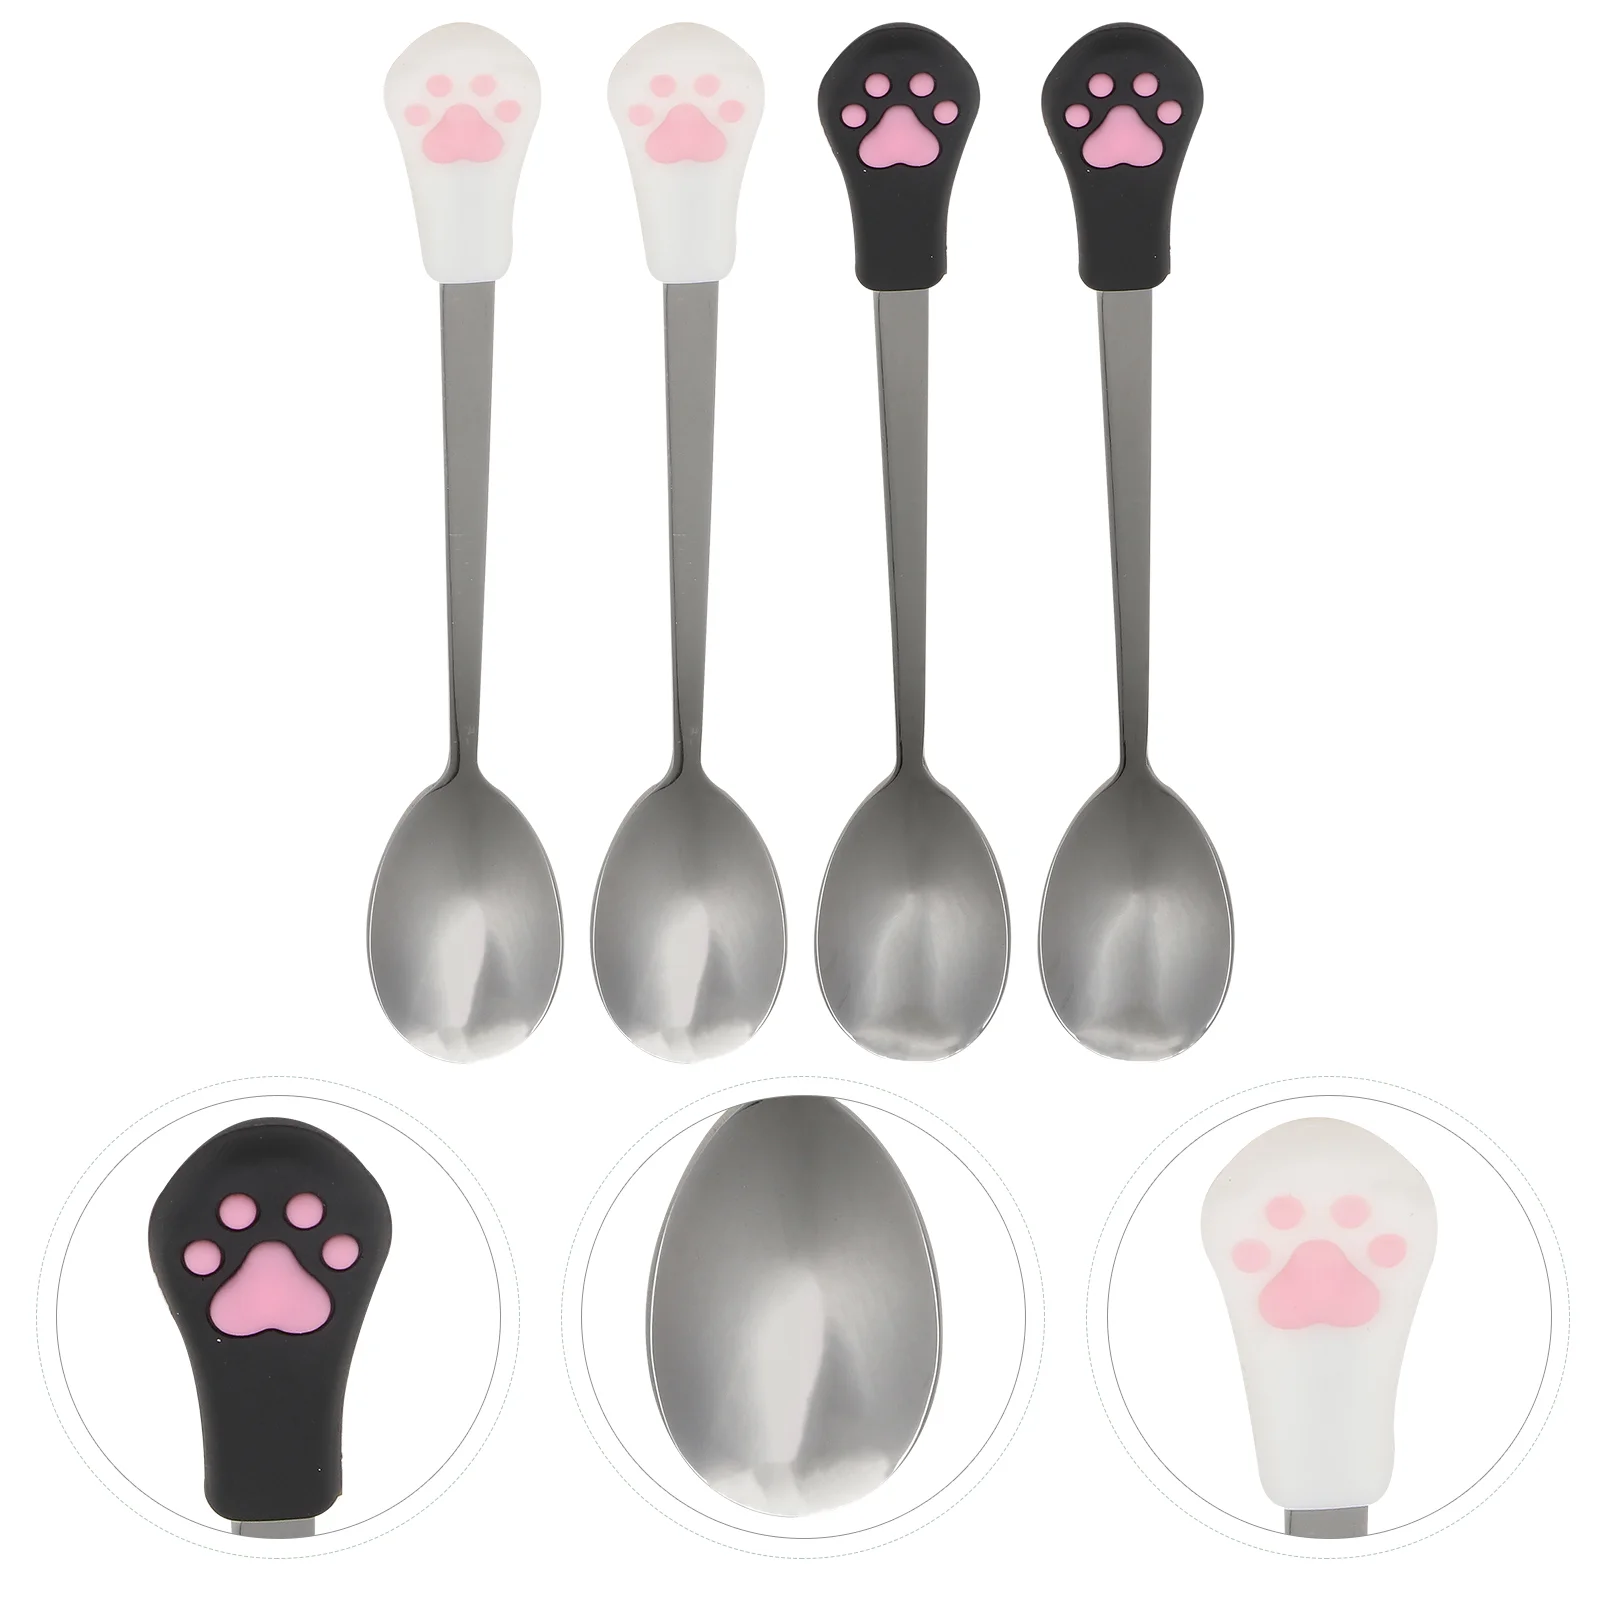 

Spoon Catdog Pet Can Stainless Steel Scoop Clawspoons Canned Wet Paw Treat Dessert Silicone Utensils Feeding Rustic Mixing